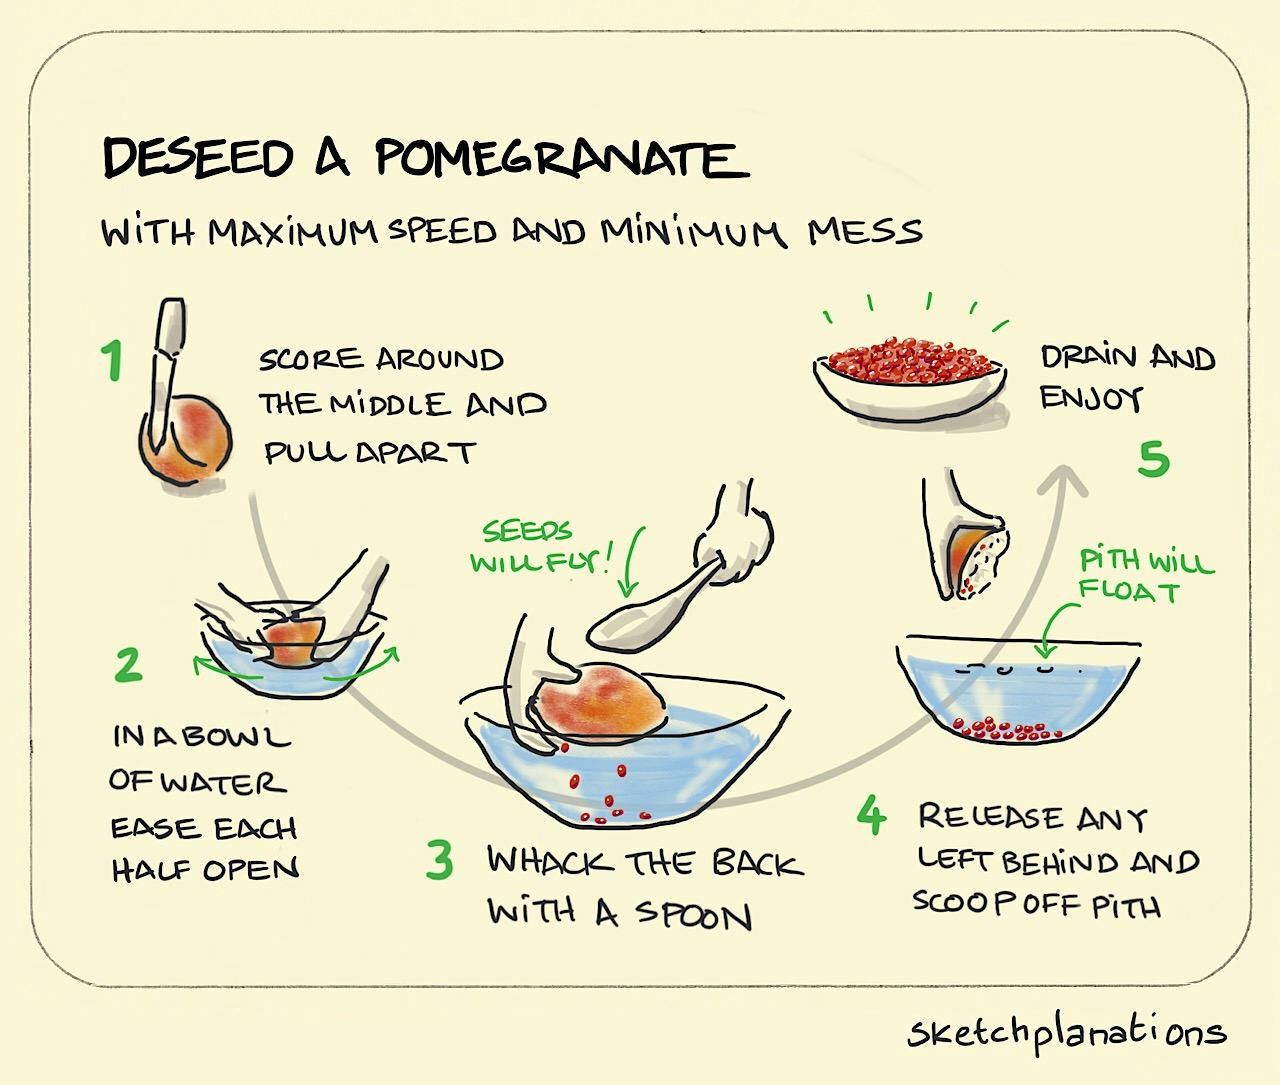 Deseed a pomegranate - Sketchplanations